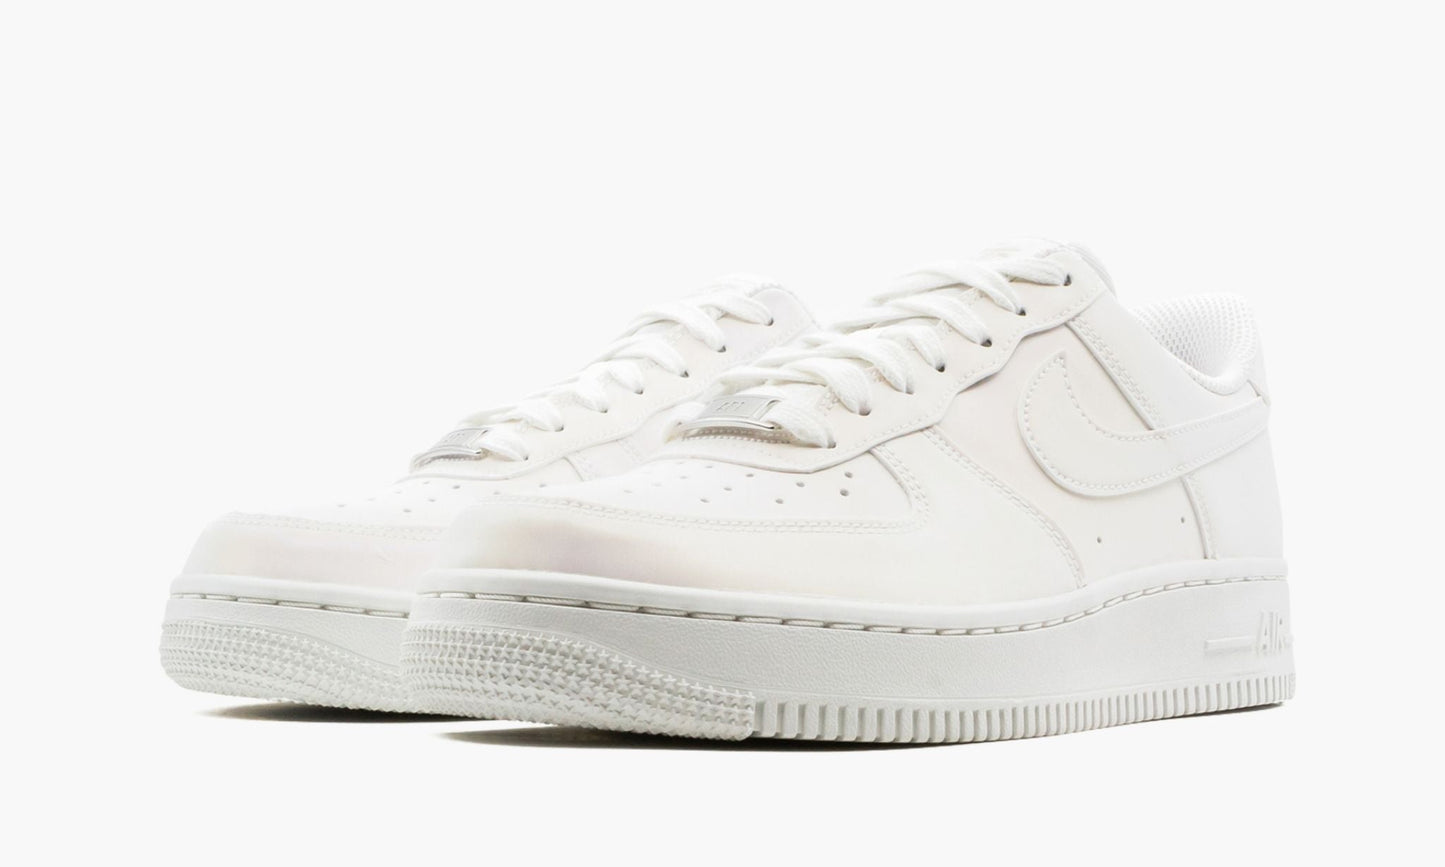 Wmns Air Force 1 '07 "Reflective White"